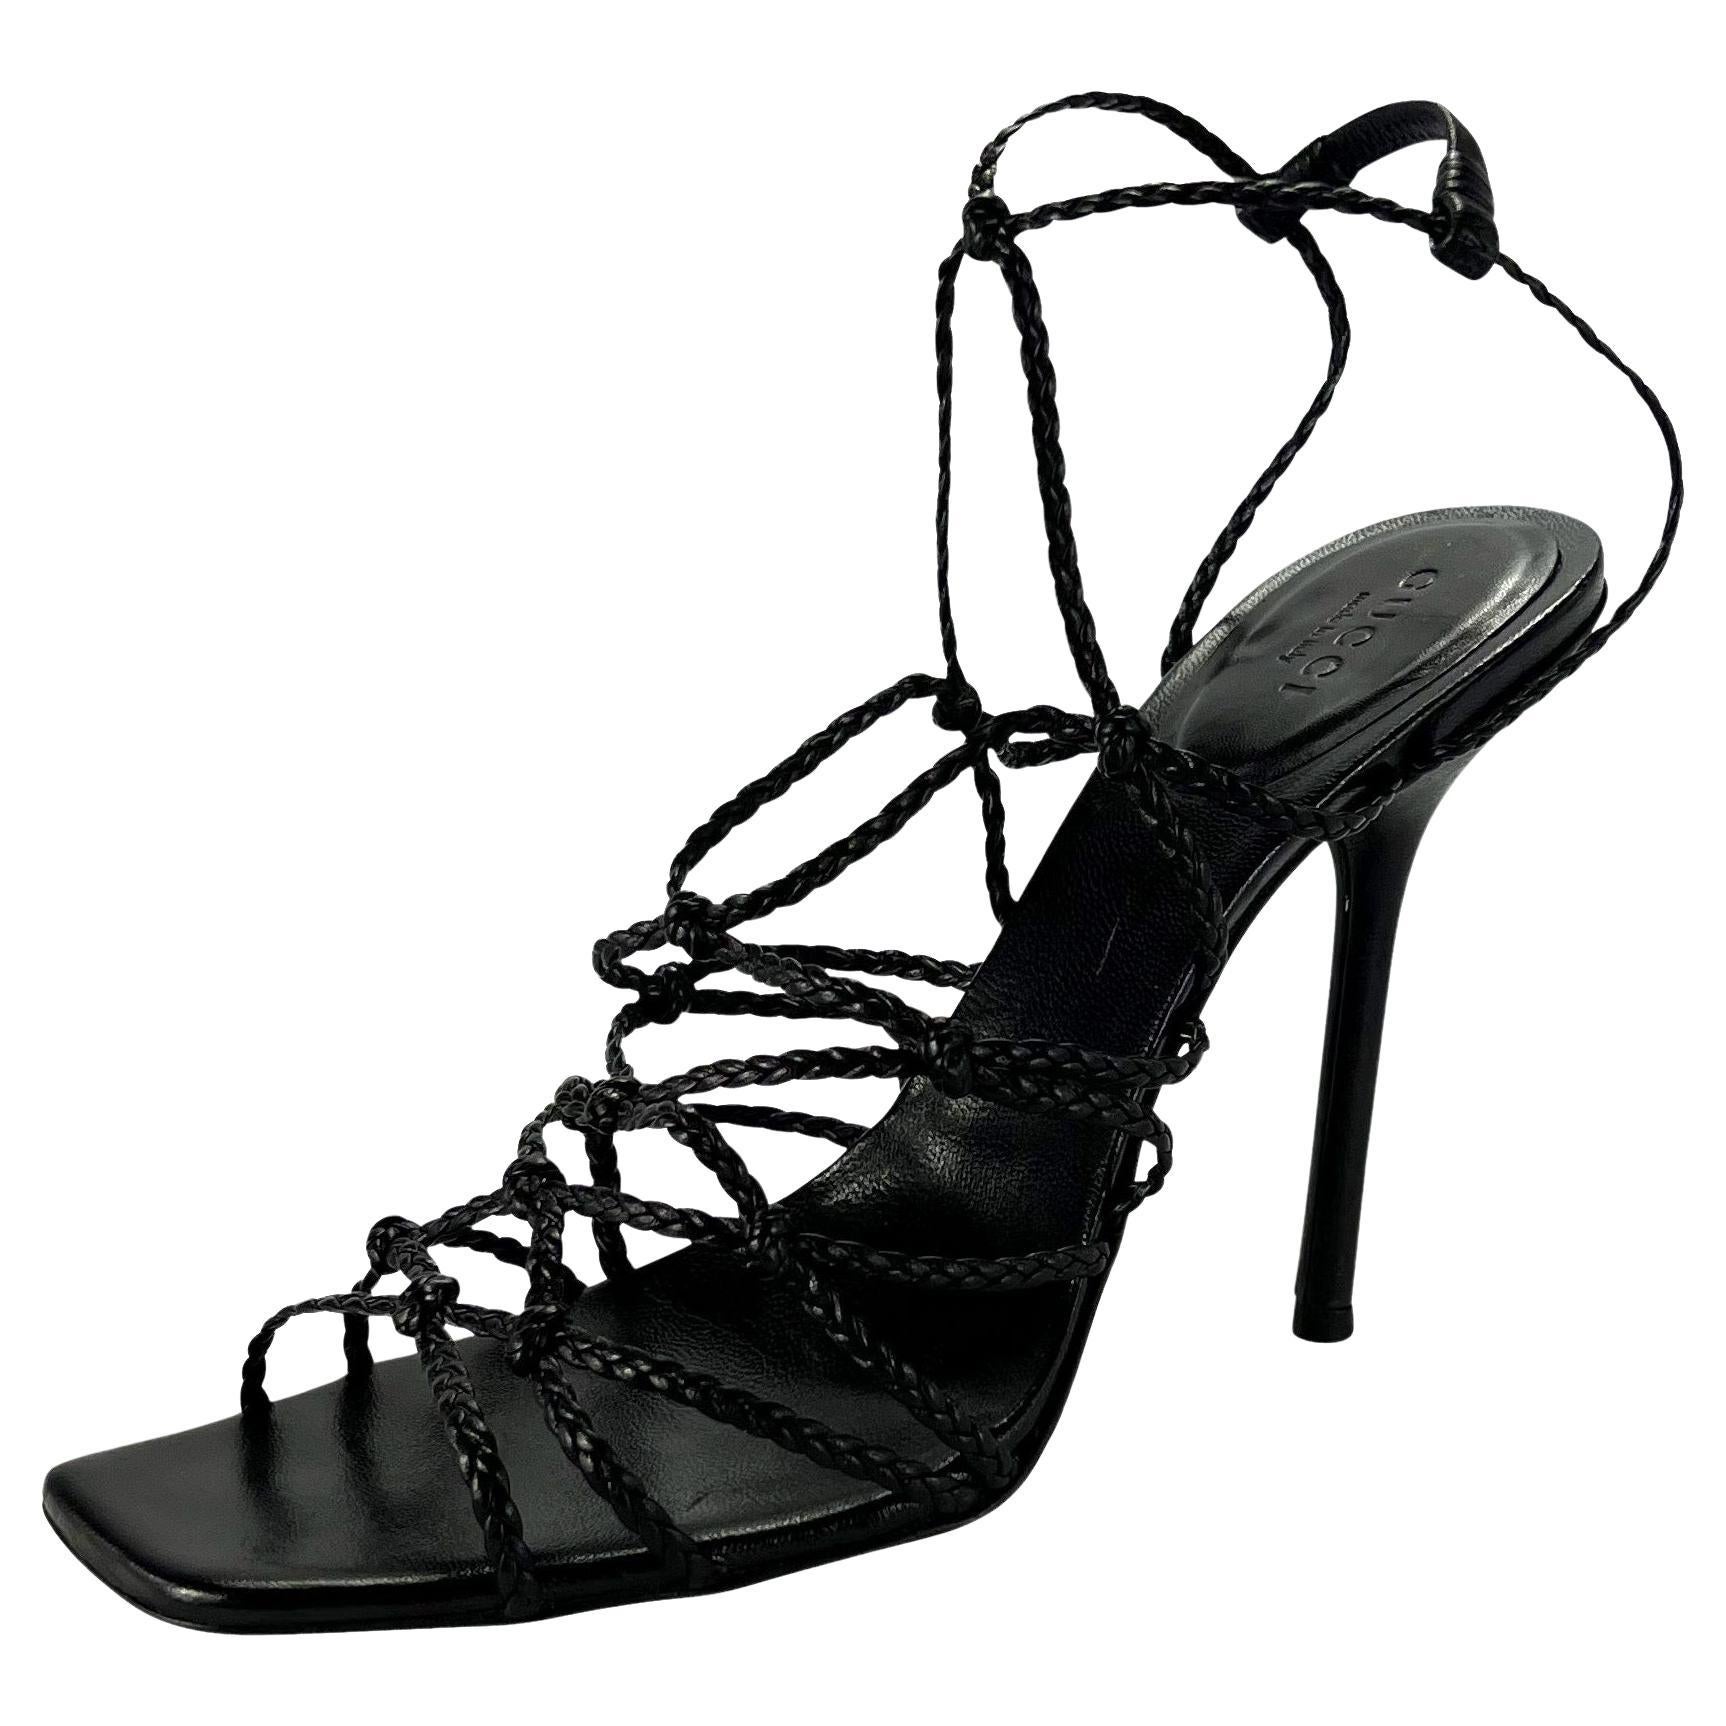 Presenting a pair of black leather braided Gucci strap heels, designed by Tom Ford. From 2002, these gorgeous heels feature a square toe and have interwoven braided leather wrapping the foot from the toe to the ankle. These Y2K pumps are